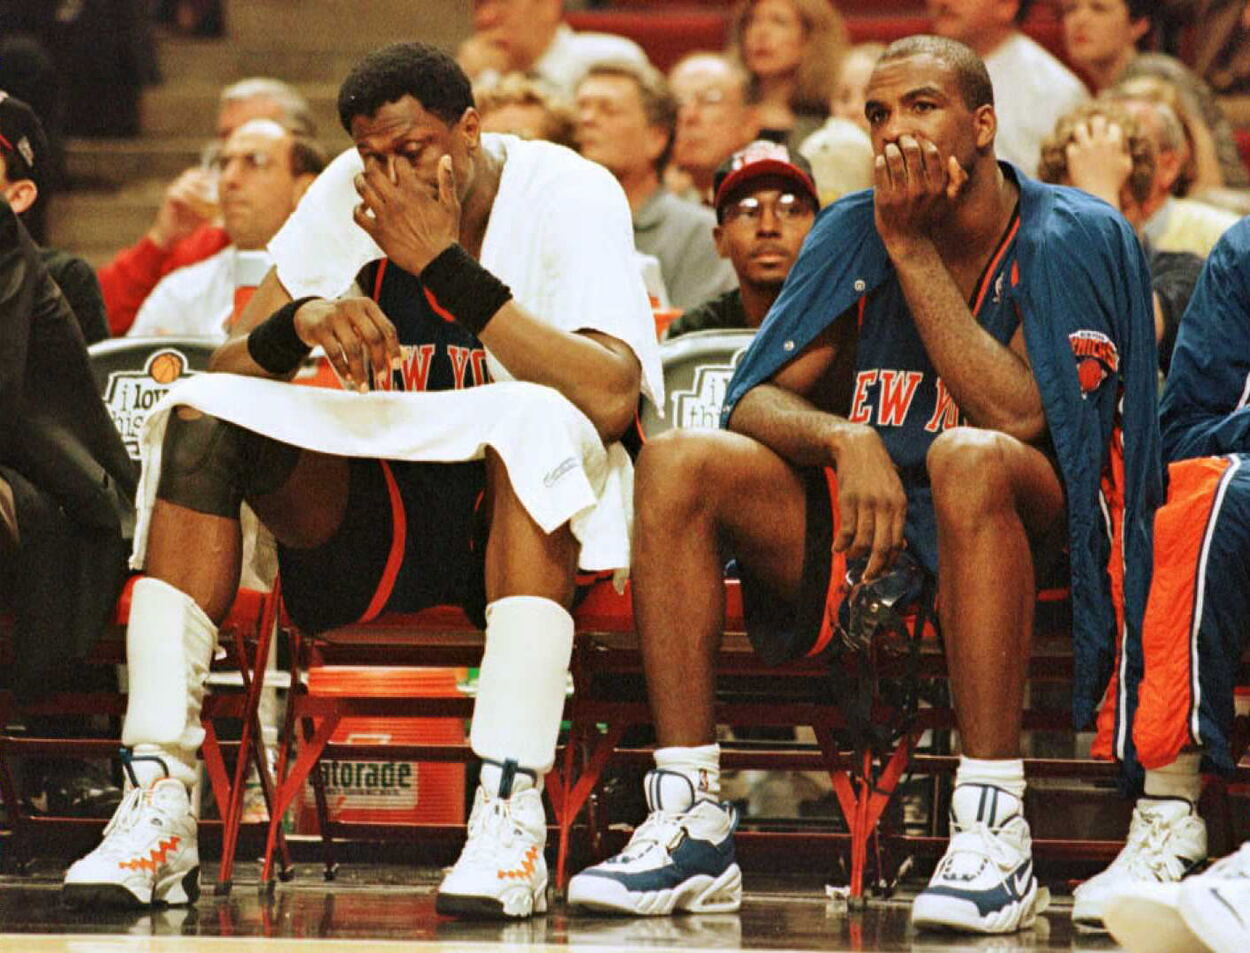 New York Knicks big men Patrick Ewing and Charles Oakley sitting on the bench.